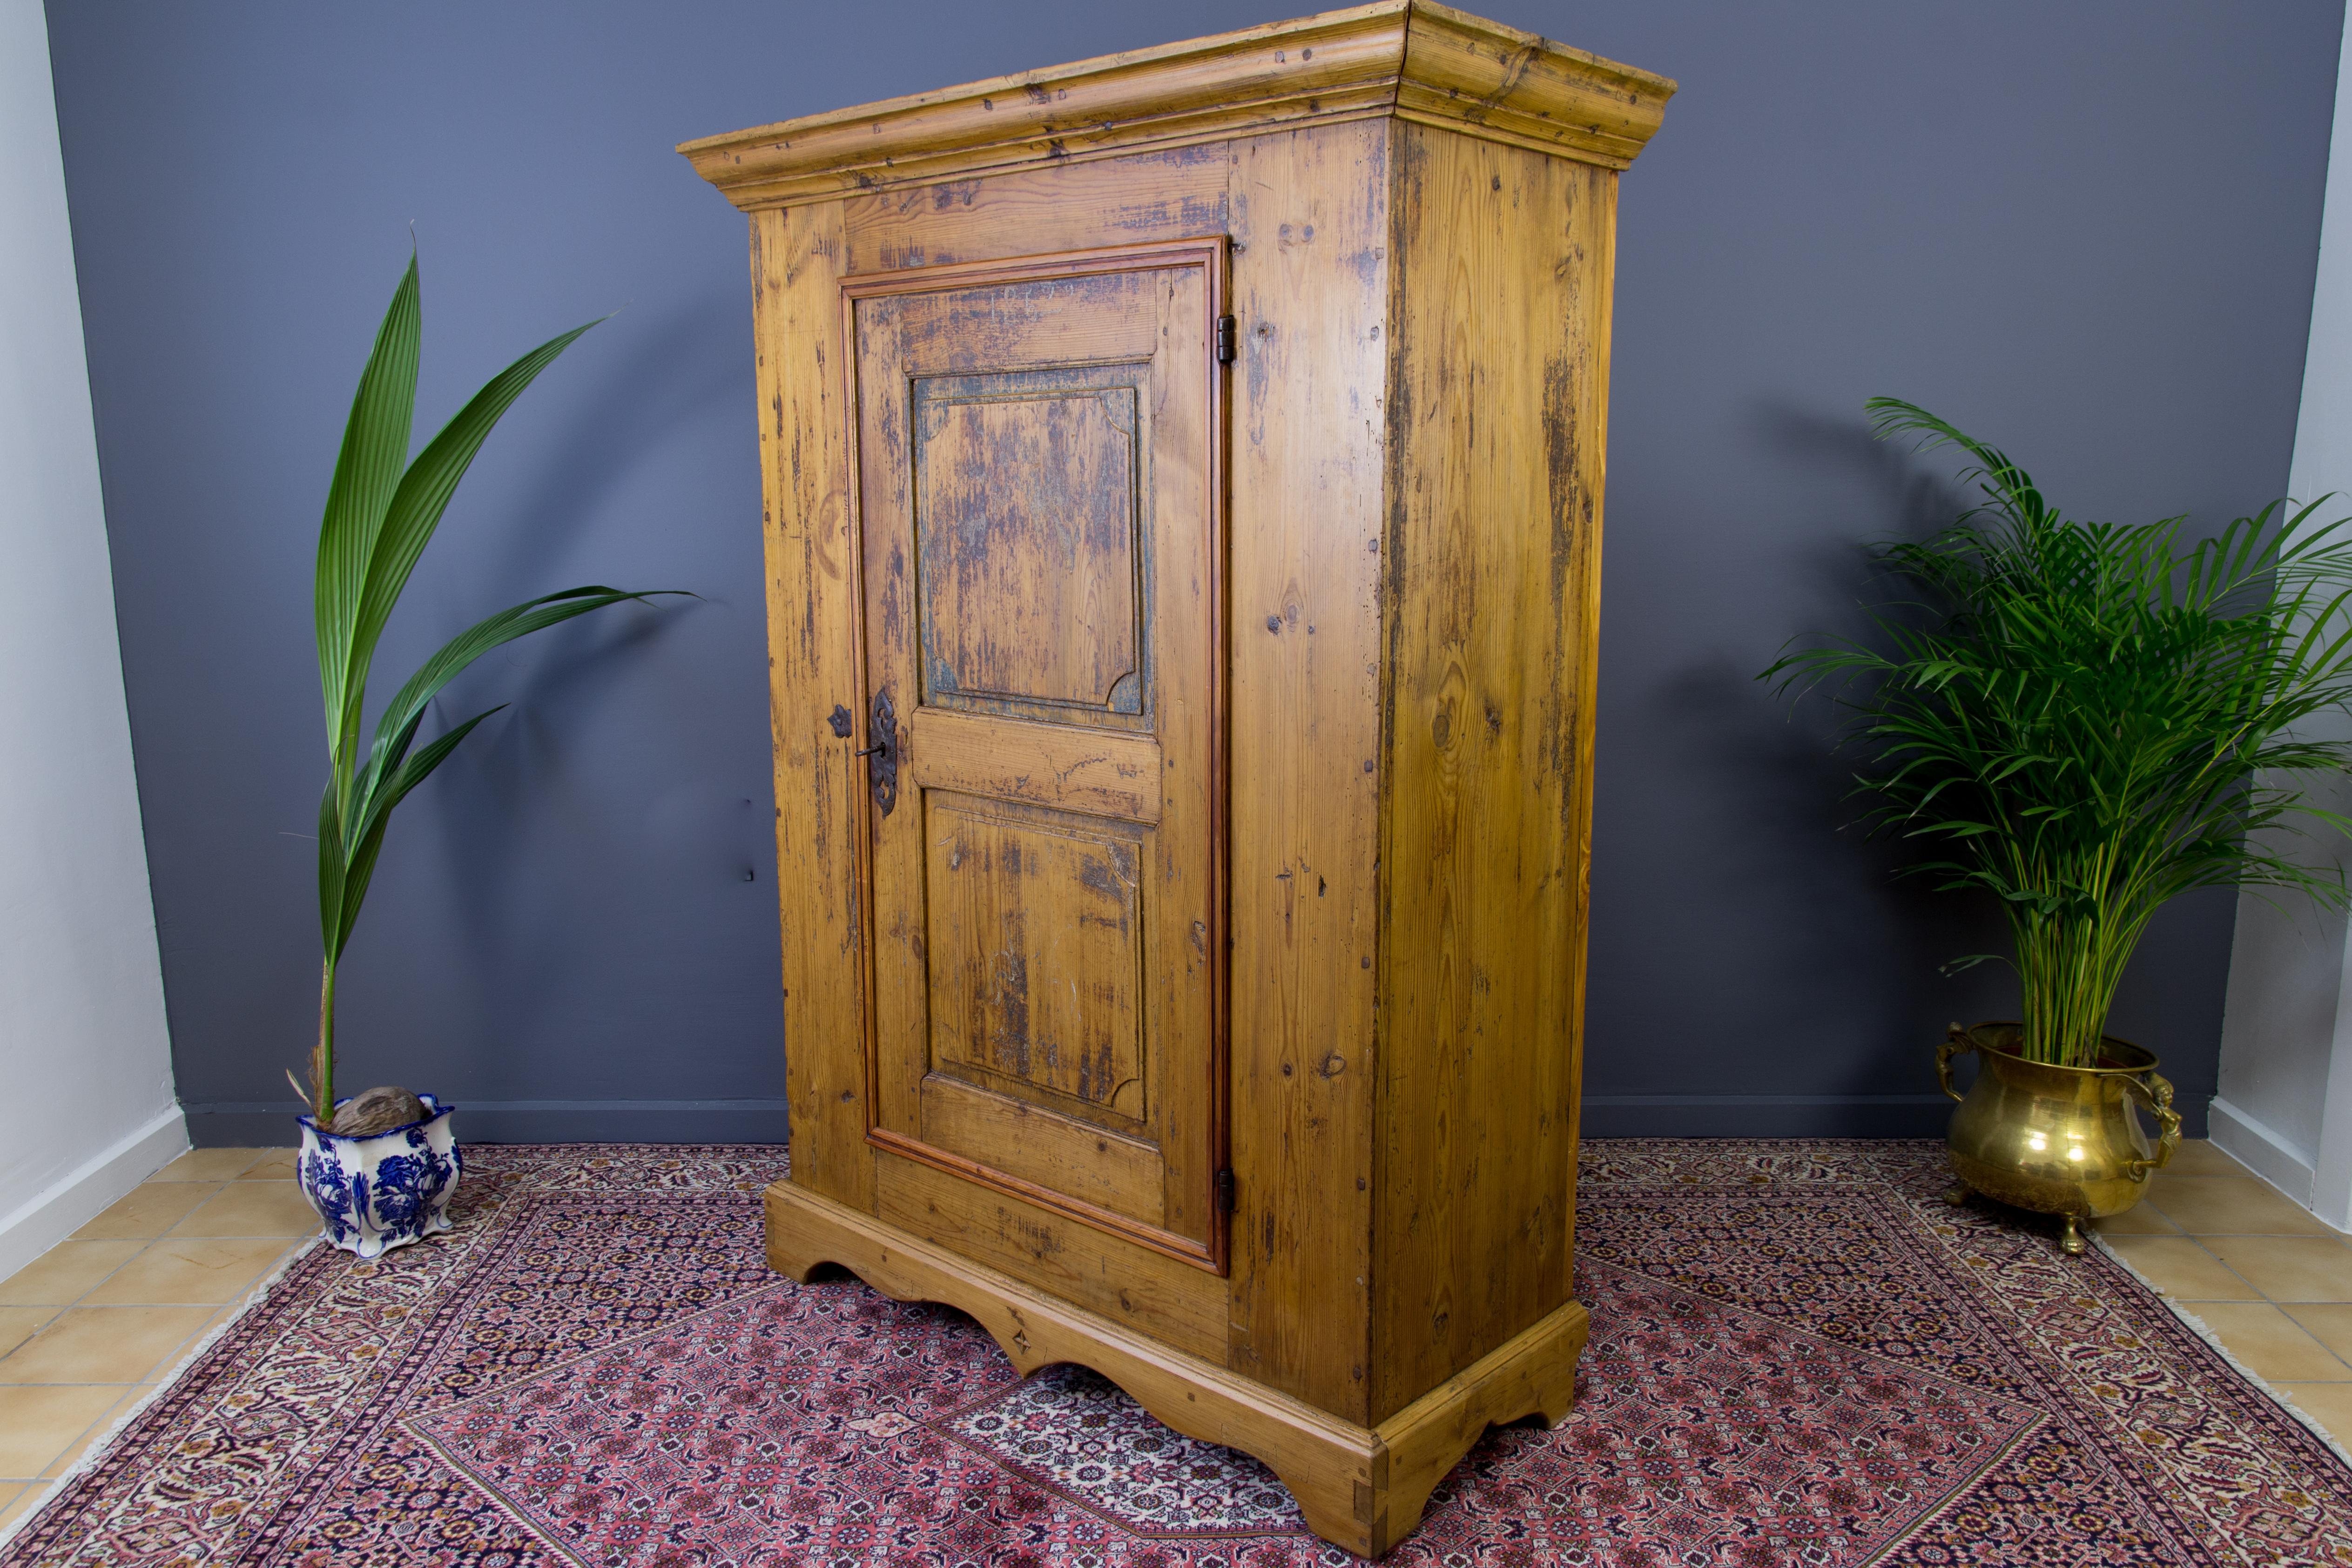 Metal Antique One Door Baltic Pine Wood Hand-Painted Armoire, dated 1852 For Sale